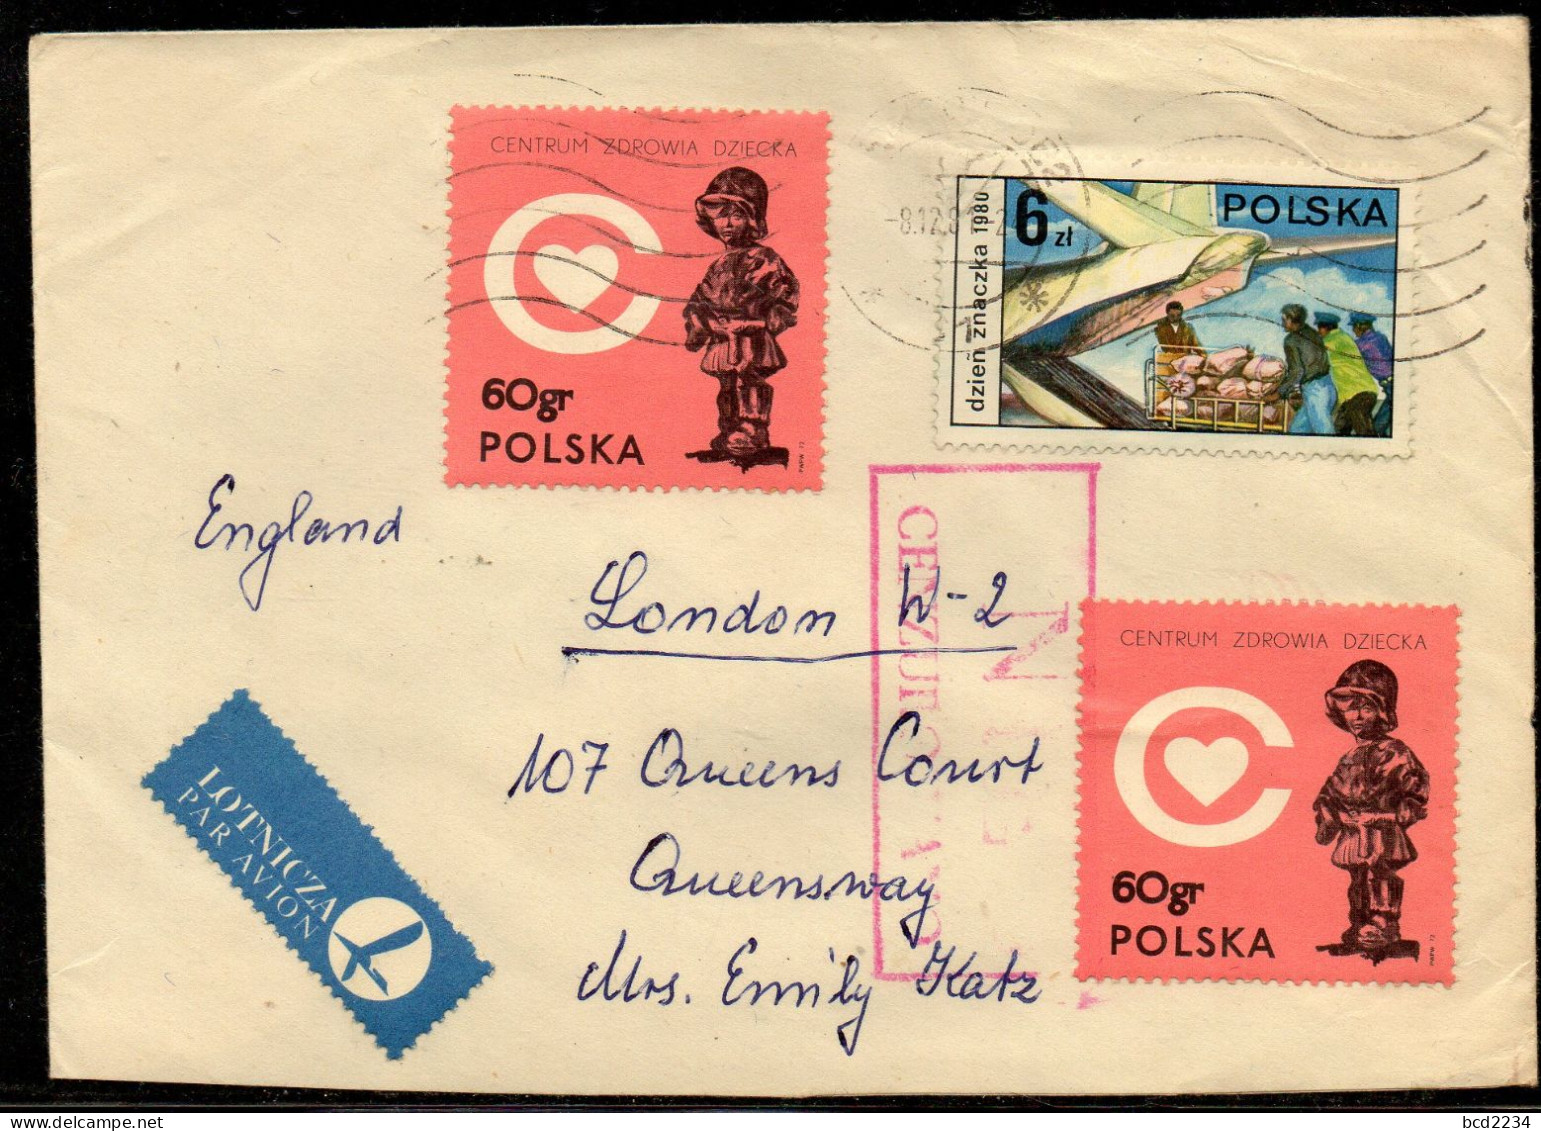 POLAND 1981 SOLIDARITY SOLIDARNOSC PERIOD MARTIAL LAW NIE CENZUROWANO NOT CENSORED MAUVE CACHET TO LONDON - Covers & Documents